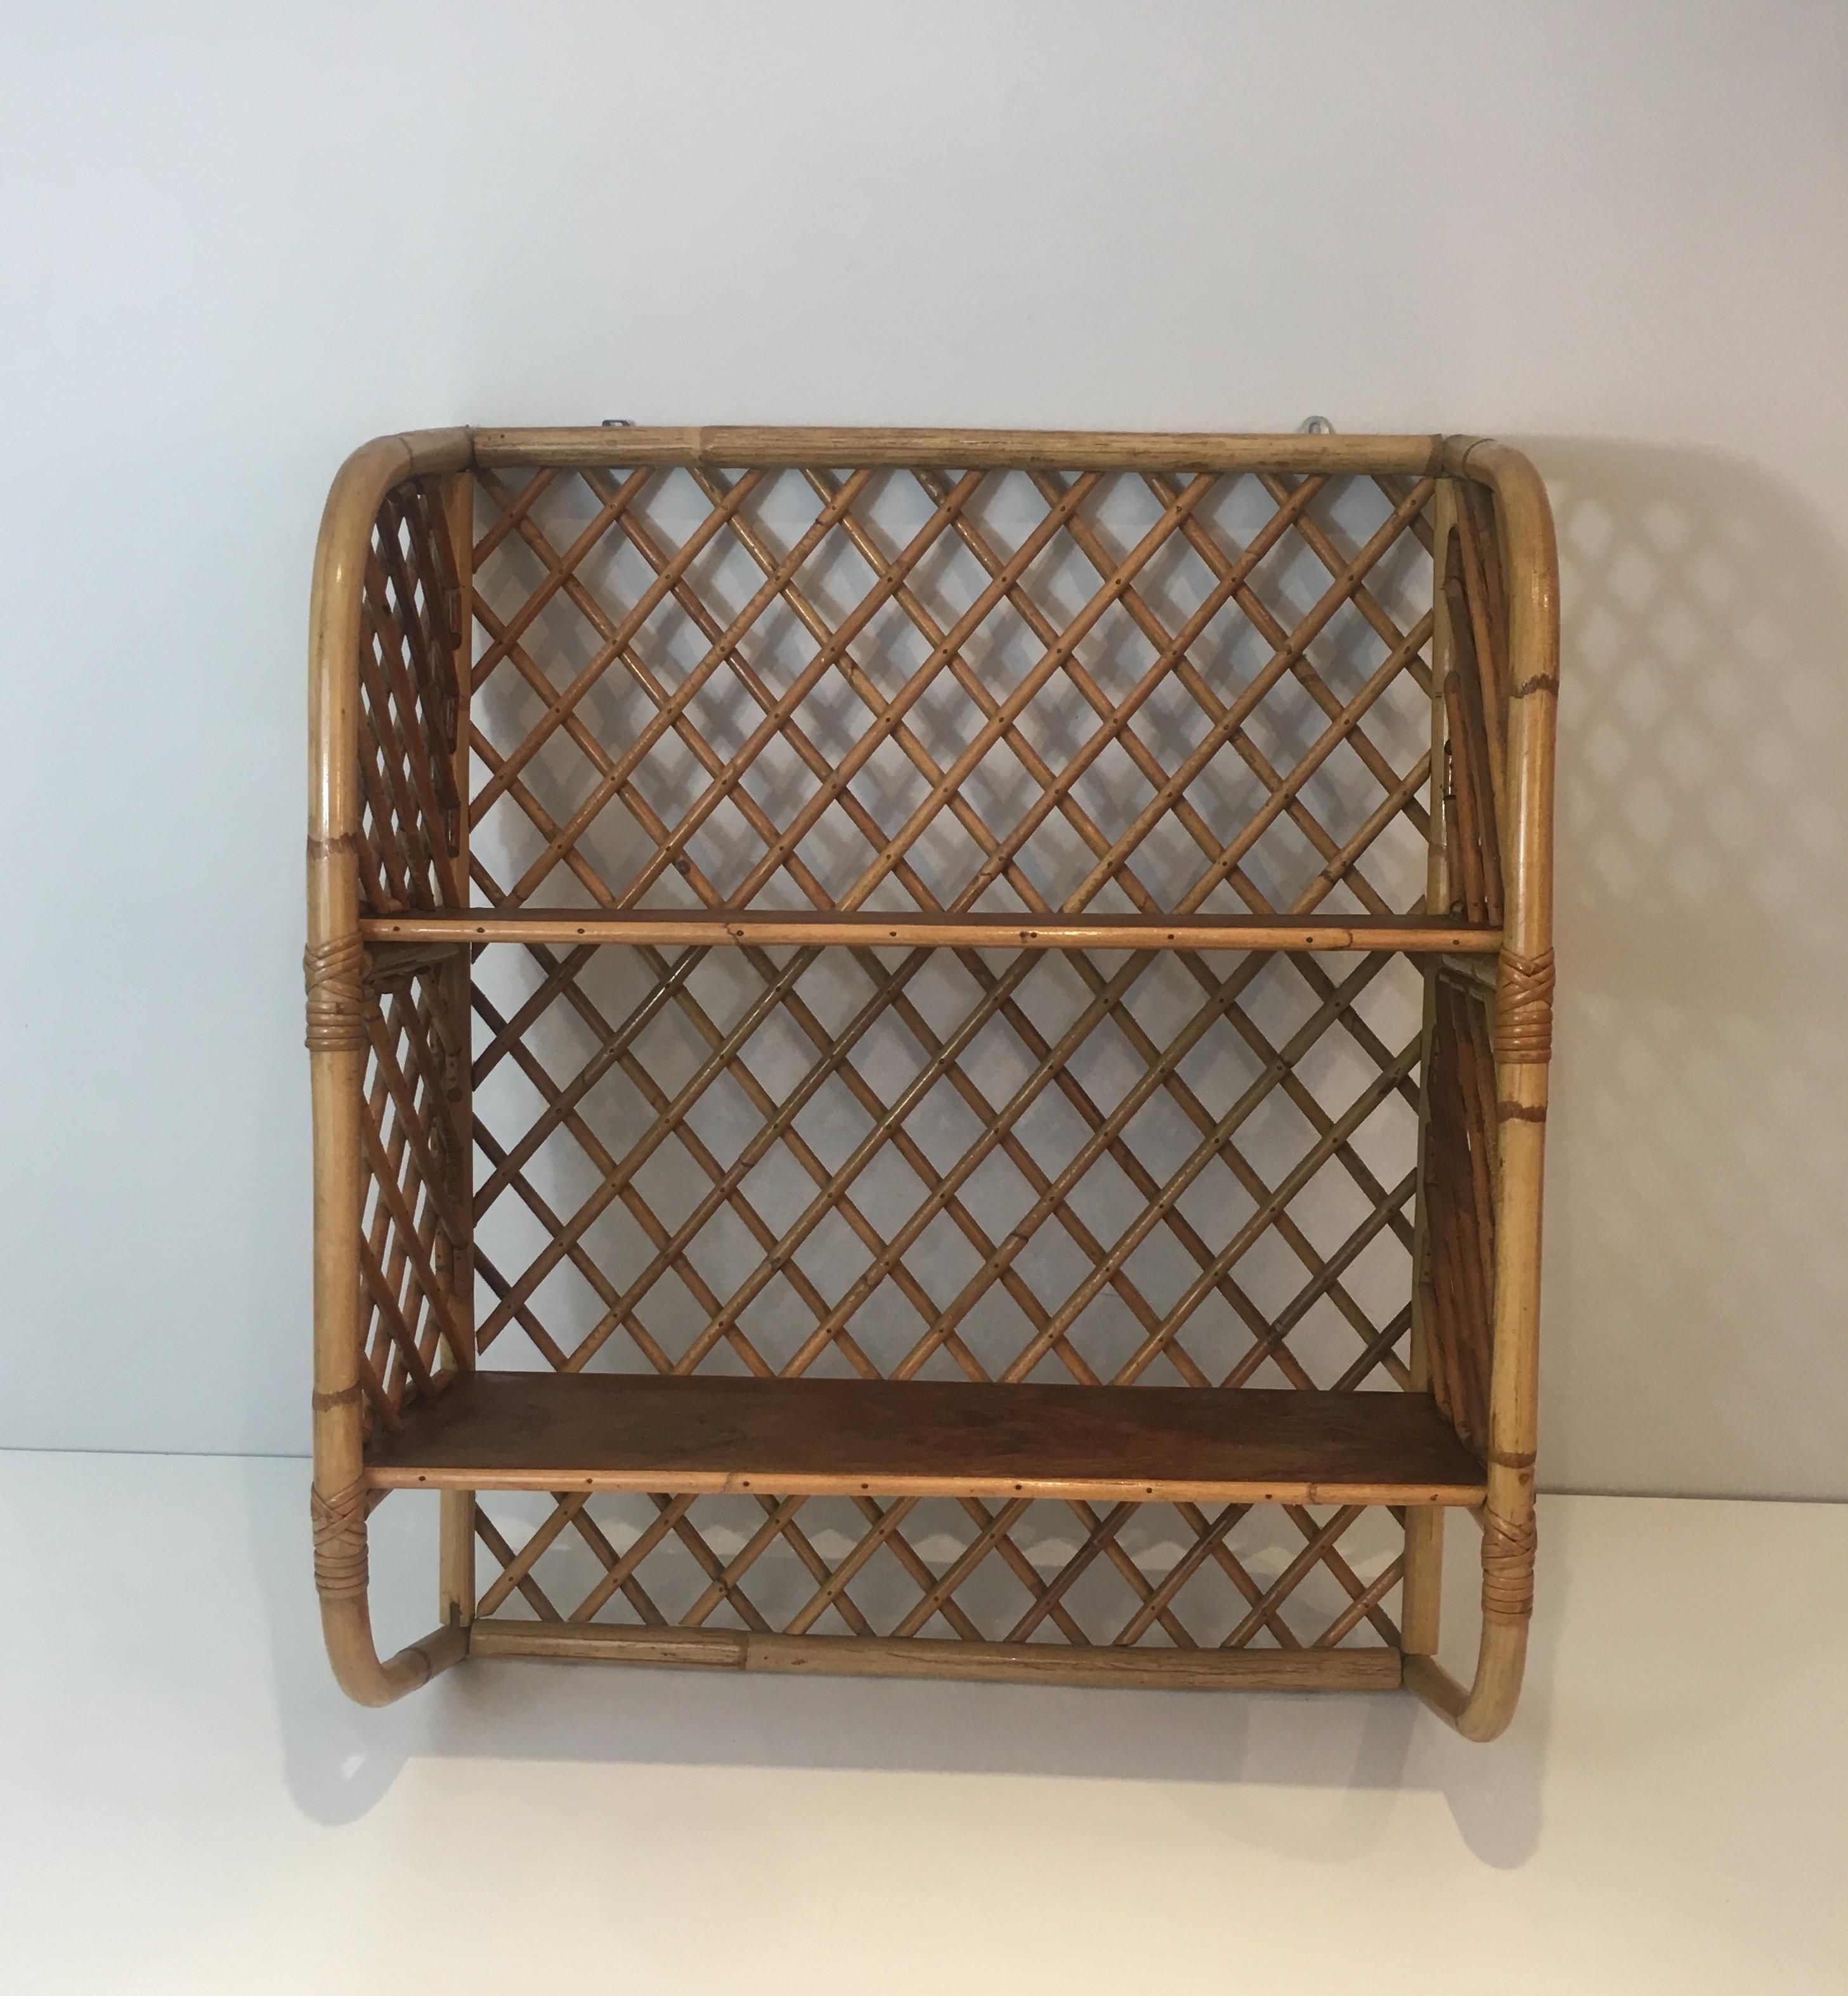 Attributed to Audoux Minet, Rattan and Wood Wall Shelves, French, circa 1950 In Good Condition For Sale In Marcq-en-Barœul, Hauts-de-France